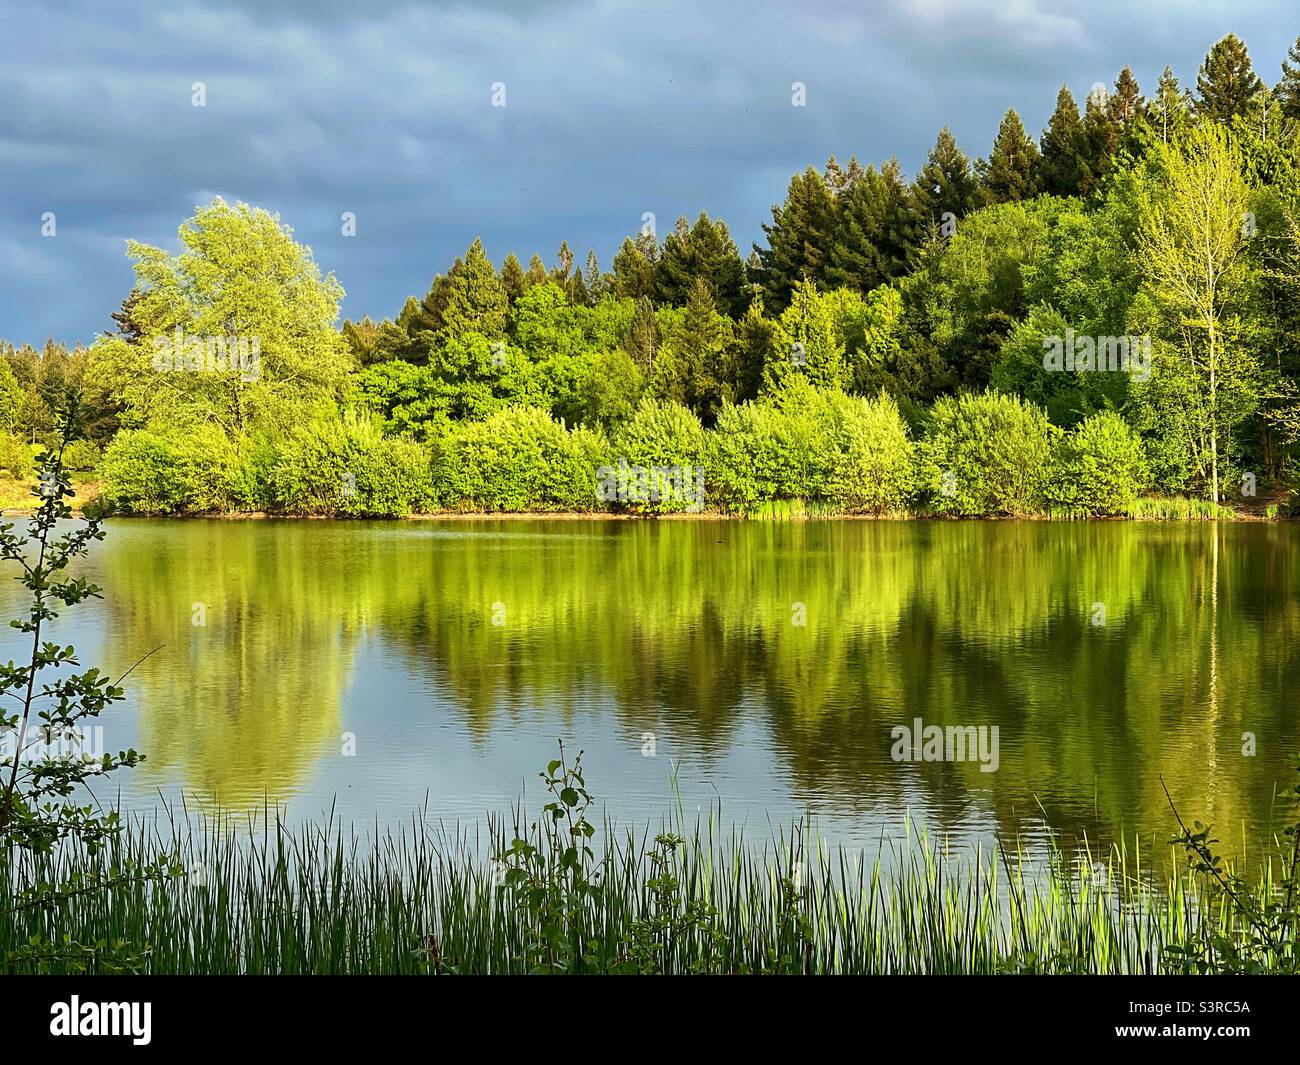 Scenic landscape view of lake at dusk with trees reflected in still waters Stock Photo